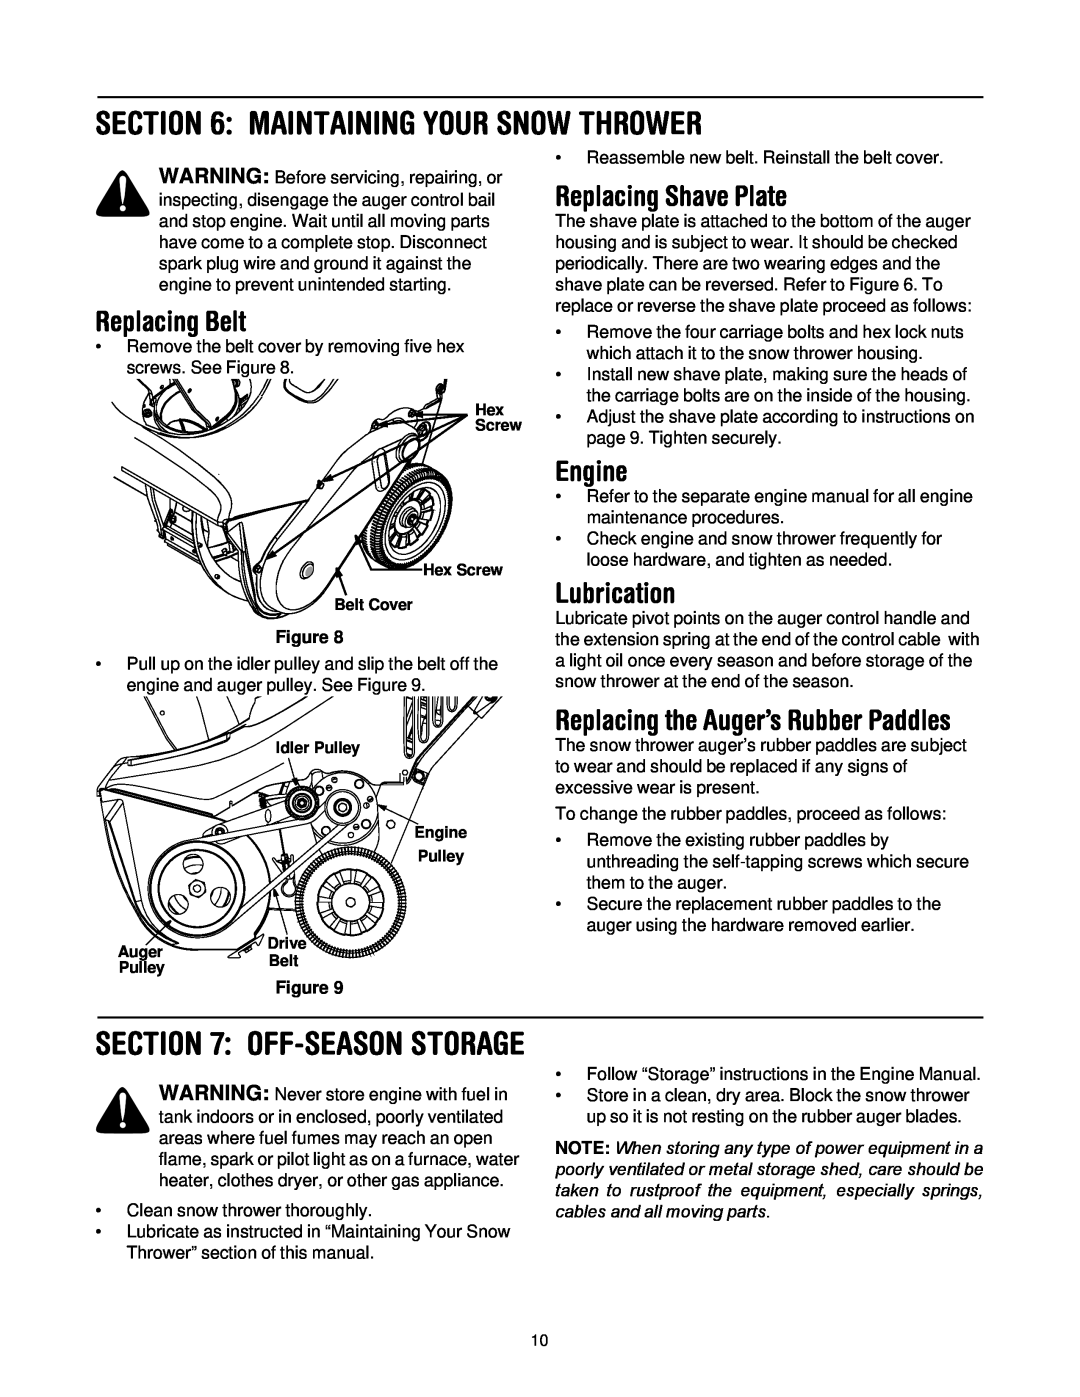 Yard-Man 2B5 & 295 manual Maintaining Your Snow Thrower, Replacing Belt, Replacing Shave Plate, Engine, Lubrication 